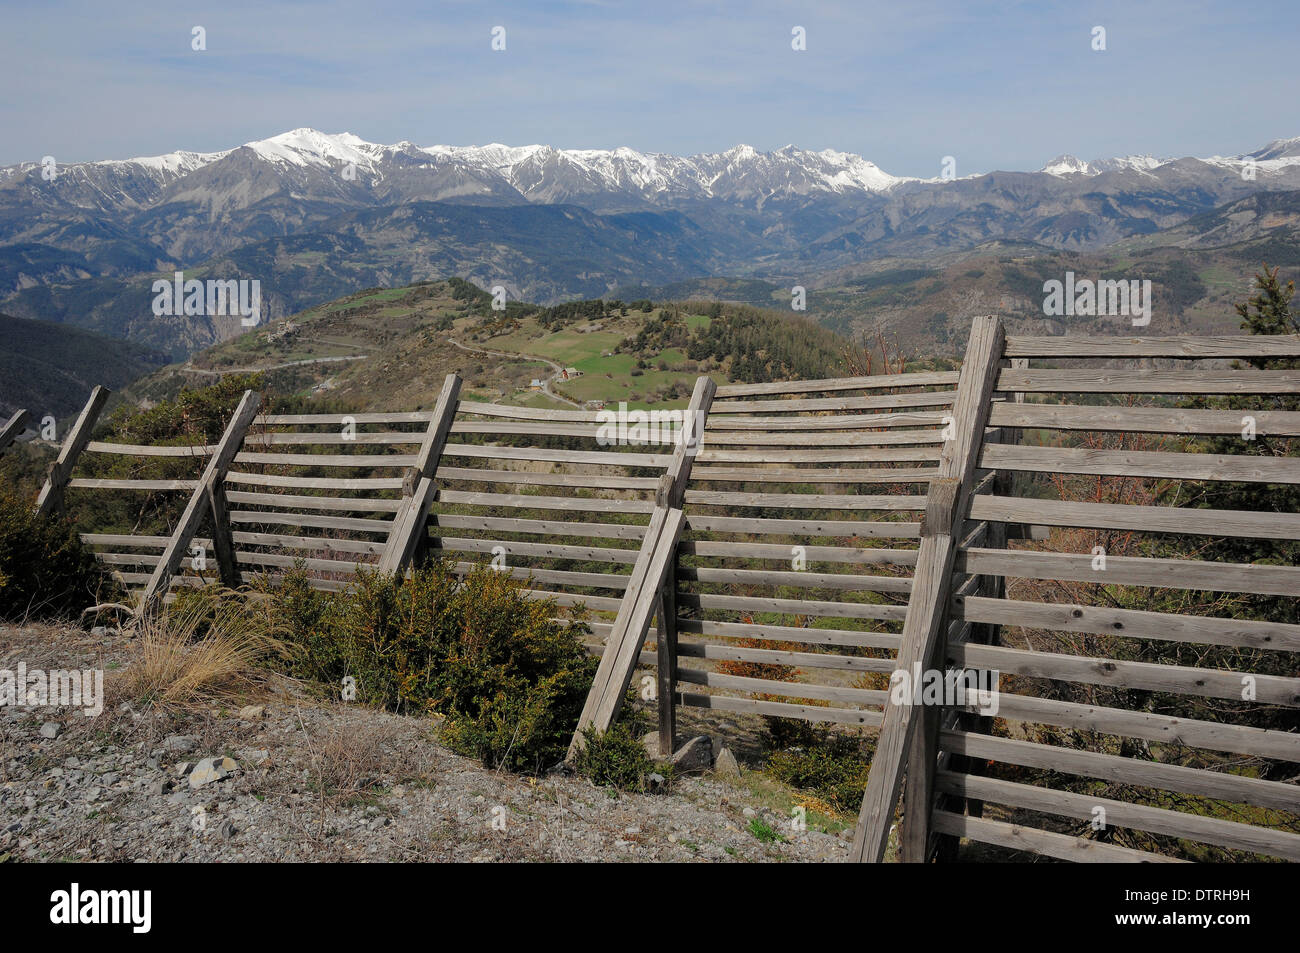 Snow protection fence and french alpes, Alpes-Maritimes, Provence-Alpes-Cote d'Azur, Southern France Stock Photo